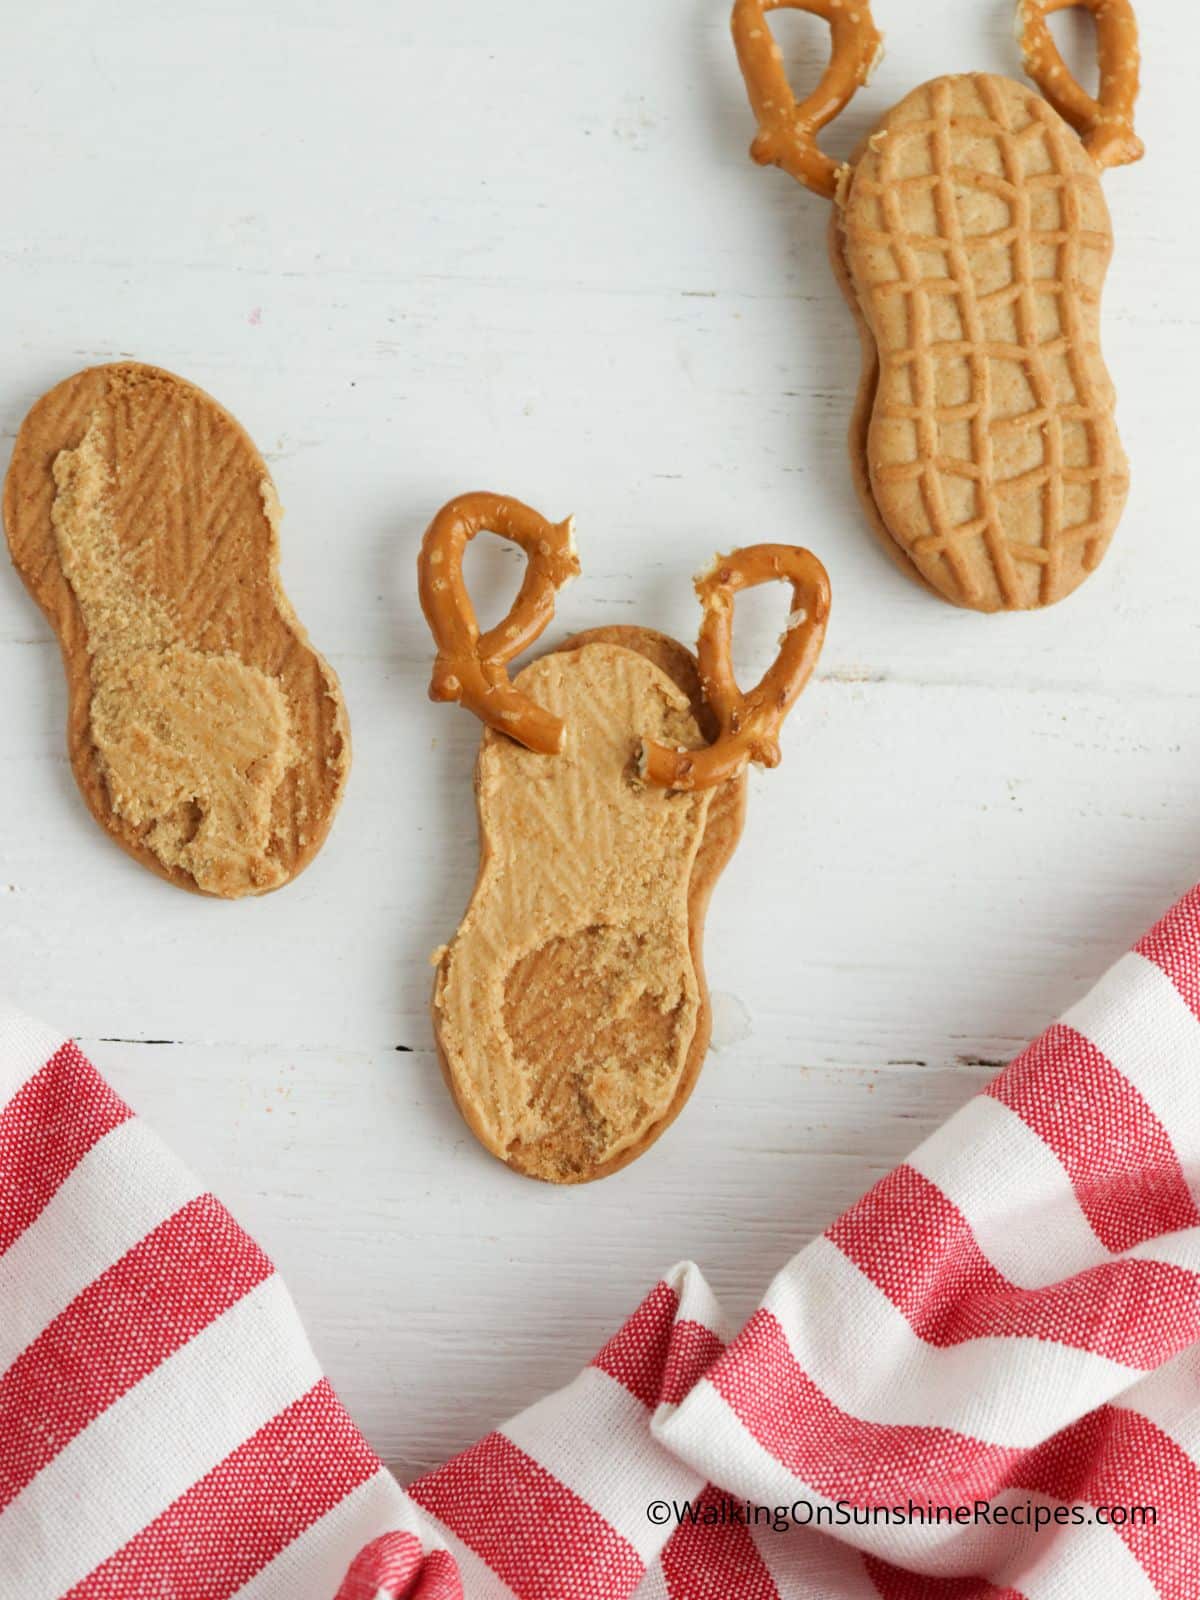 Attach pretzels to inside of cookies.